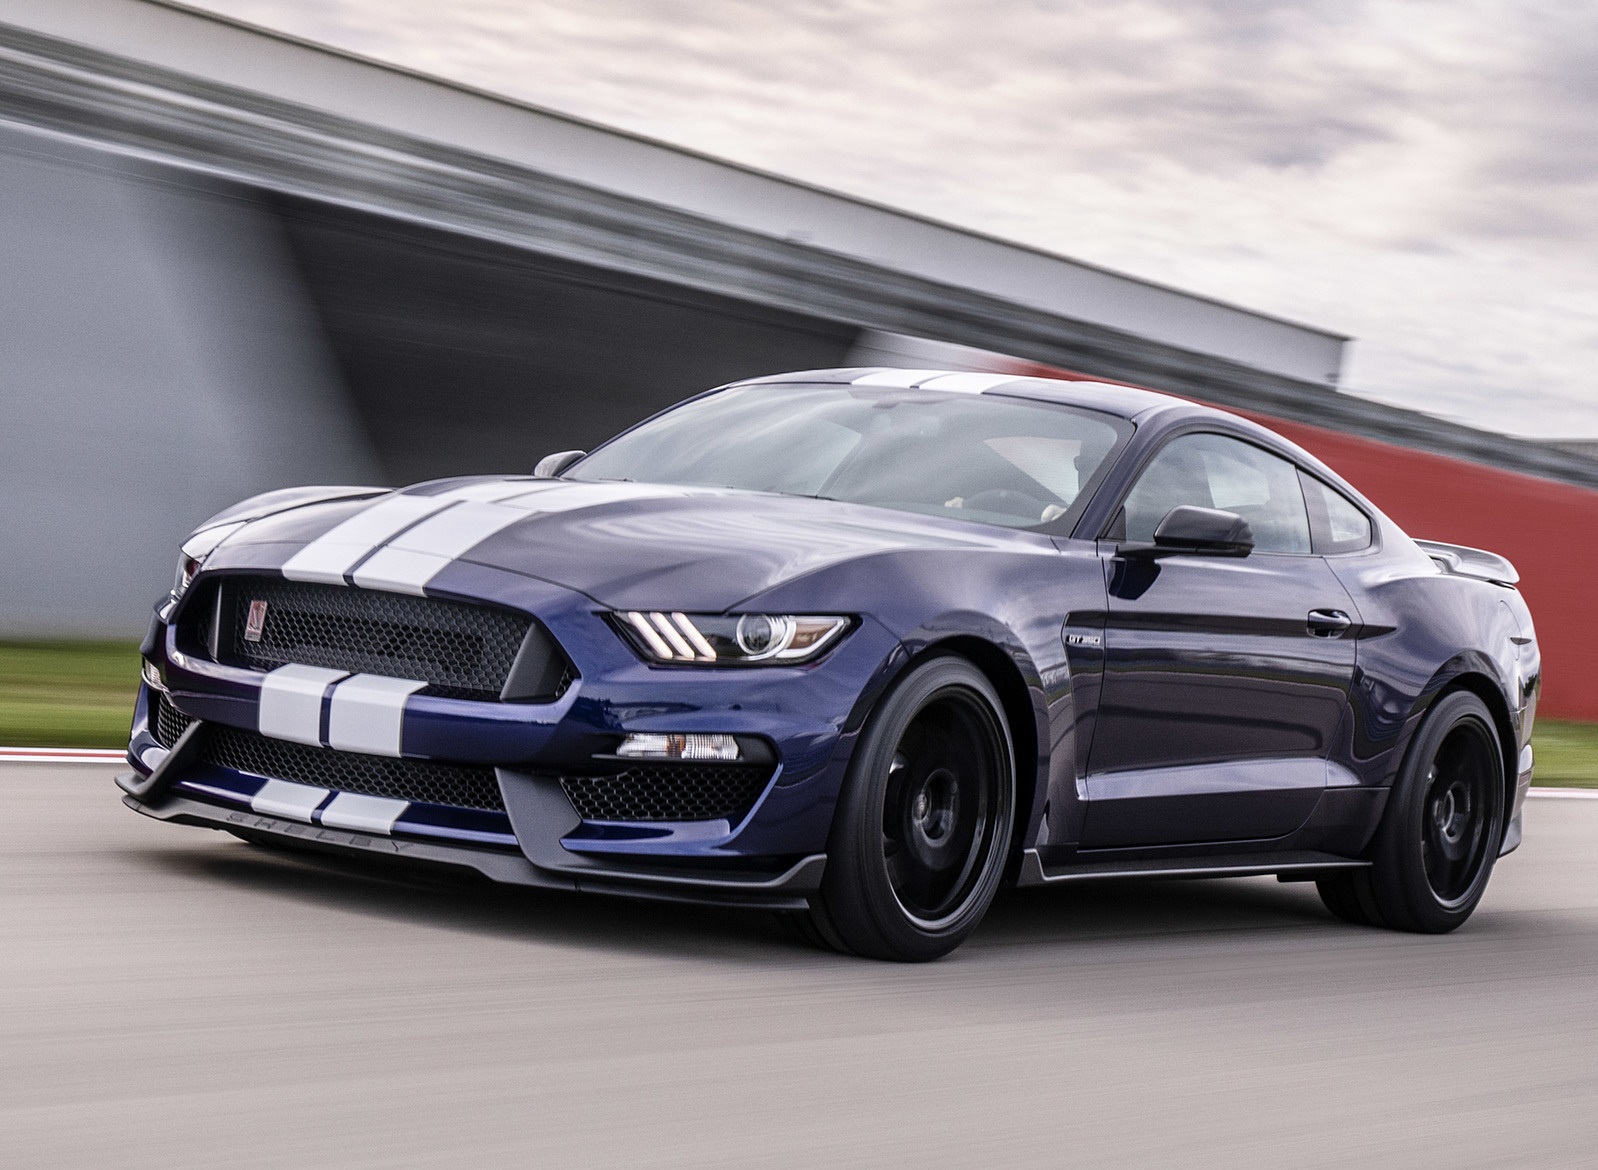 Blue and white 2019 Ford Mustang GT350